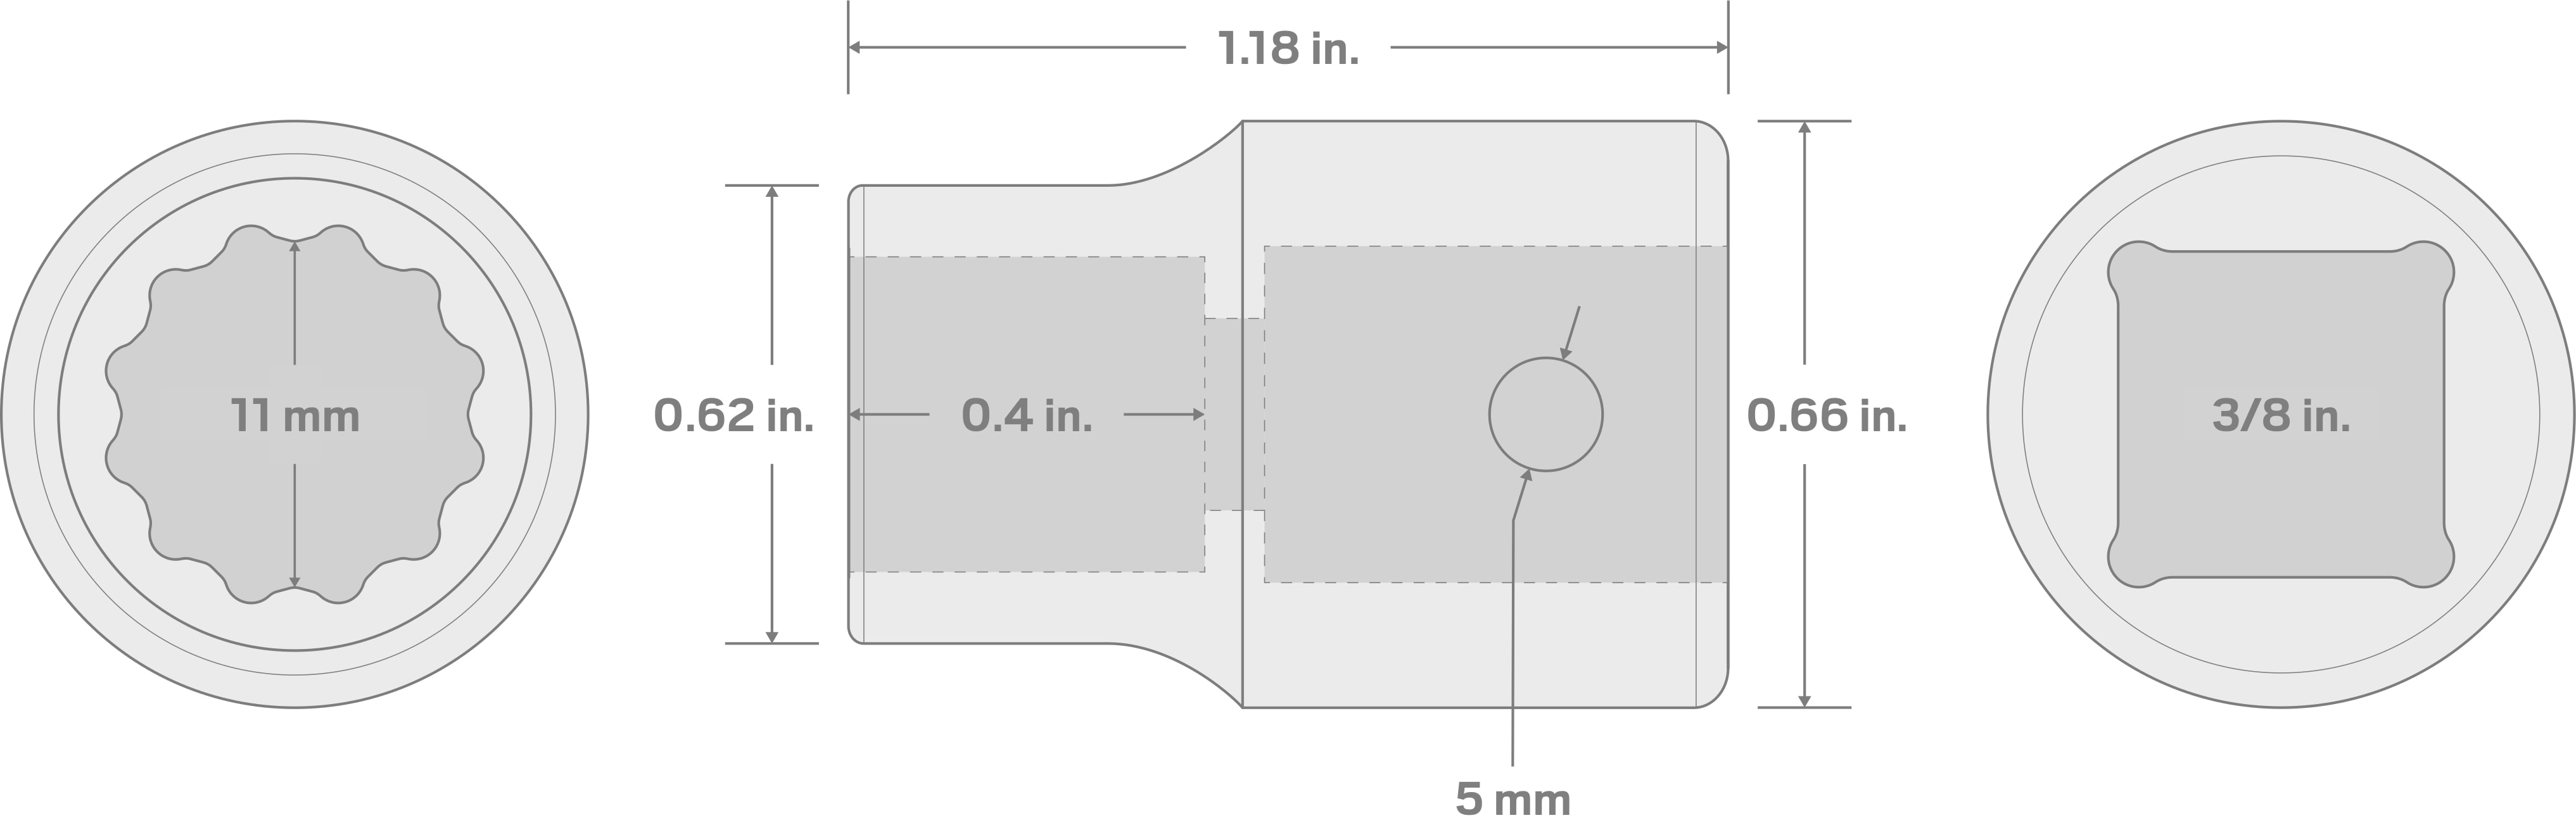 Specs for 3/8 Inch Drive x 11 mm 12-Point Impact Socket